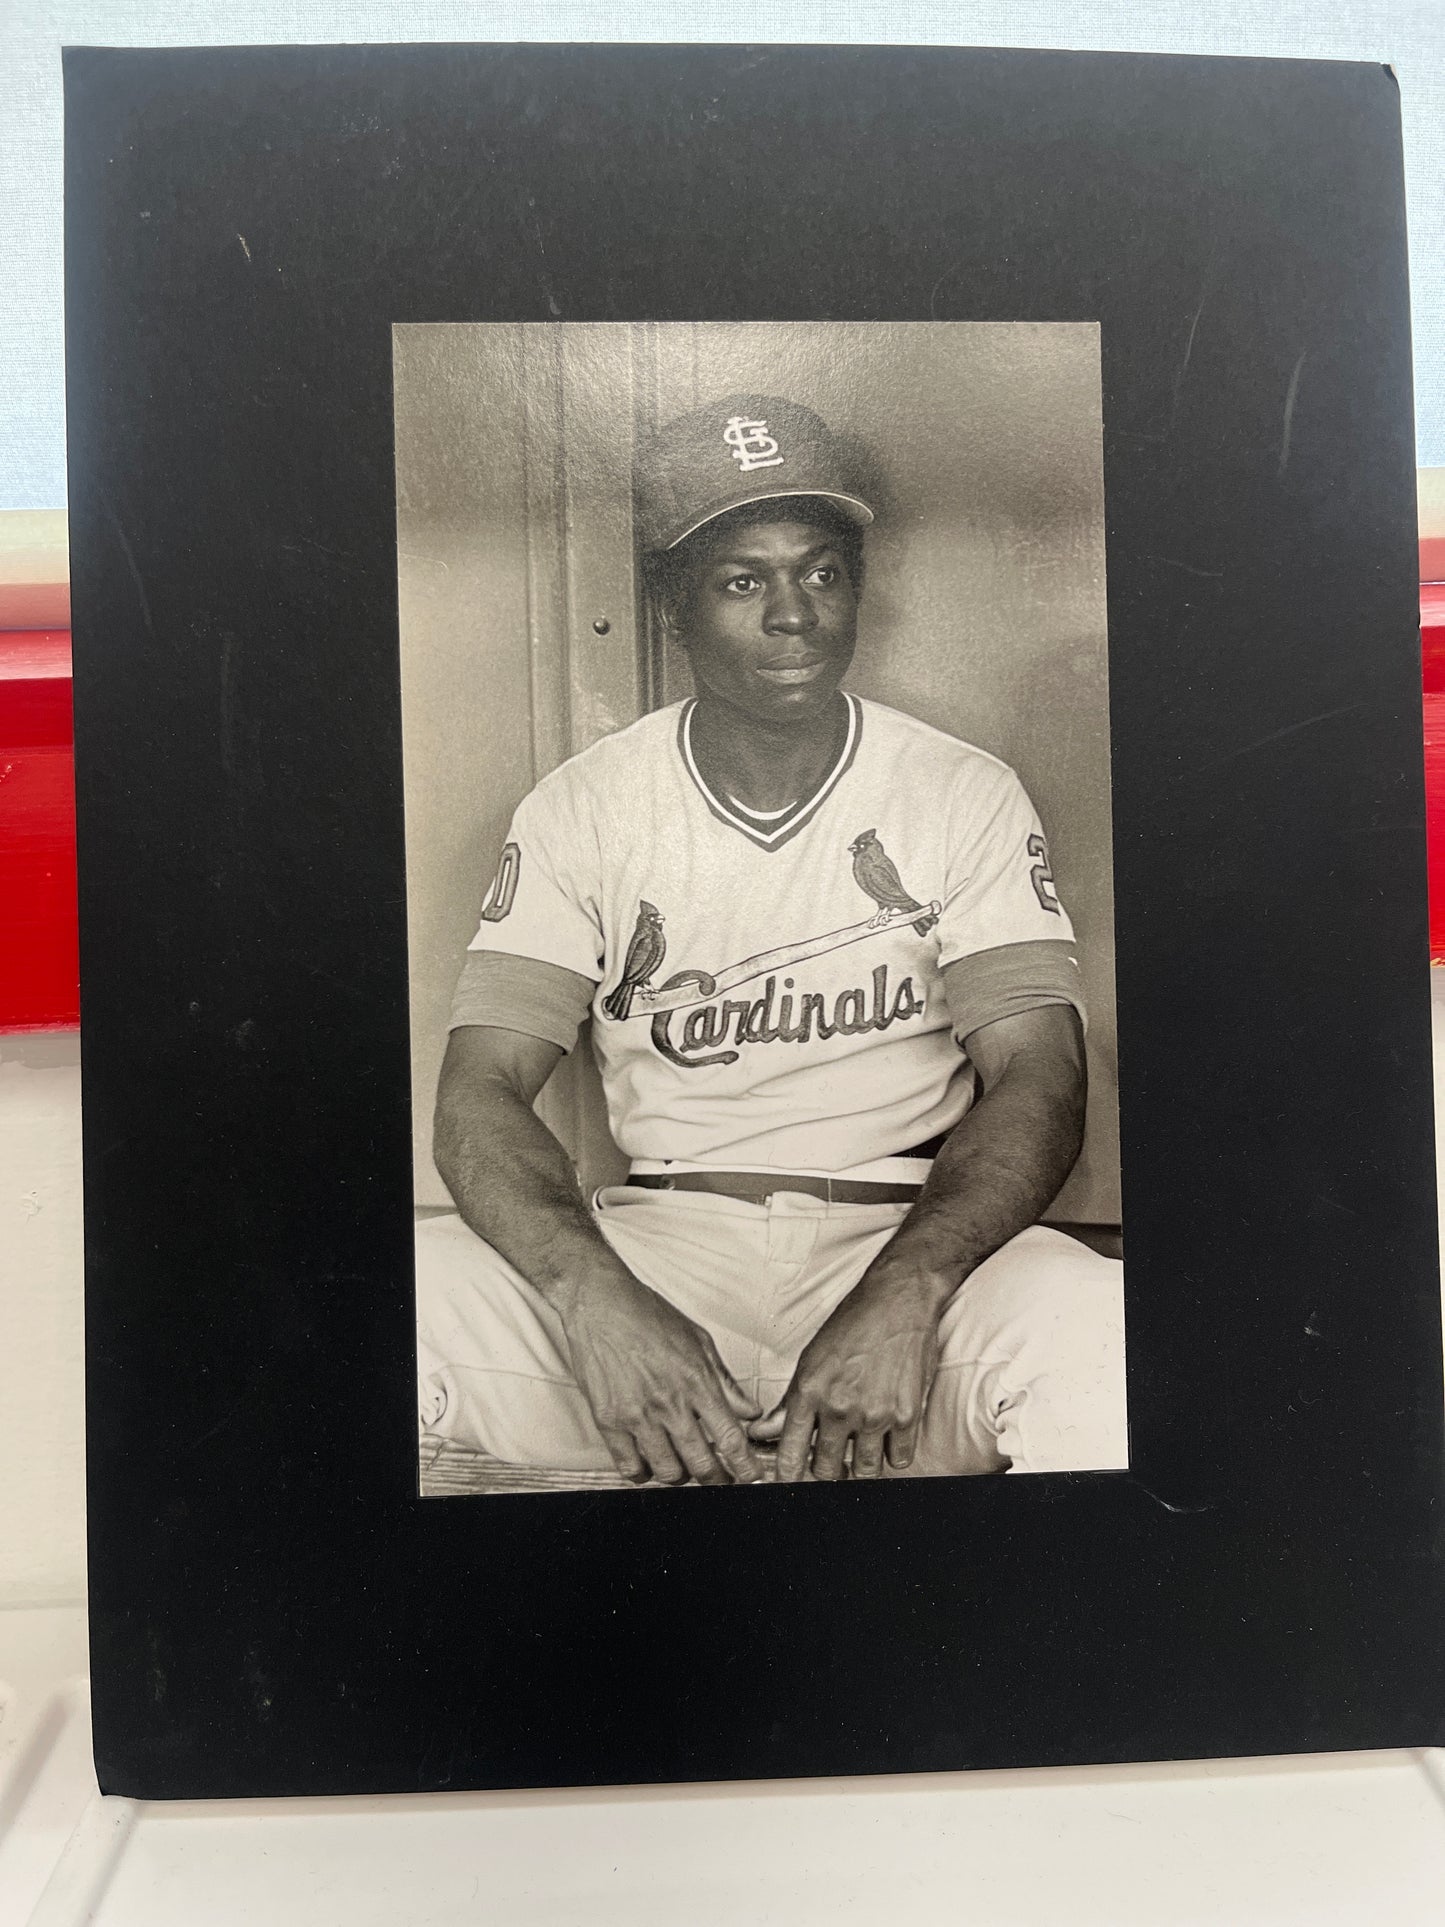 11 x 14 matted black-and-white picture of Lou Brock